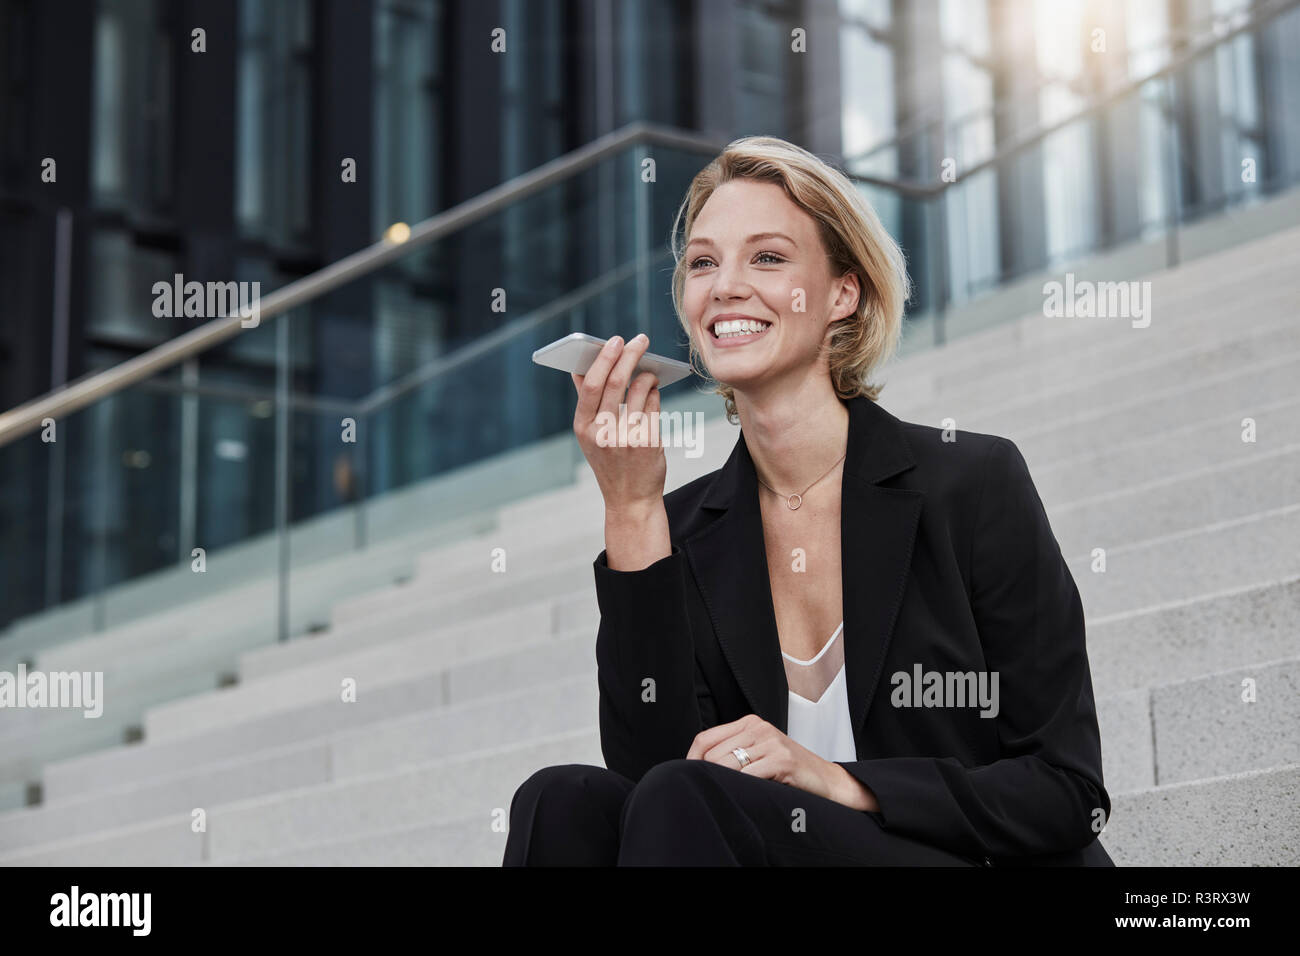 Portrait of smiling businesswoman  sitting on stairs outdoors talking on mobile phone Stock Photo